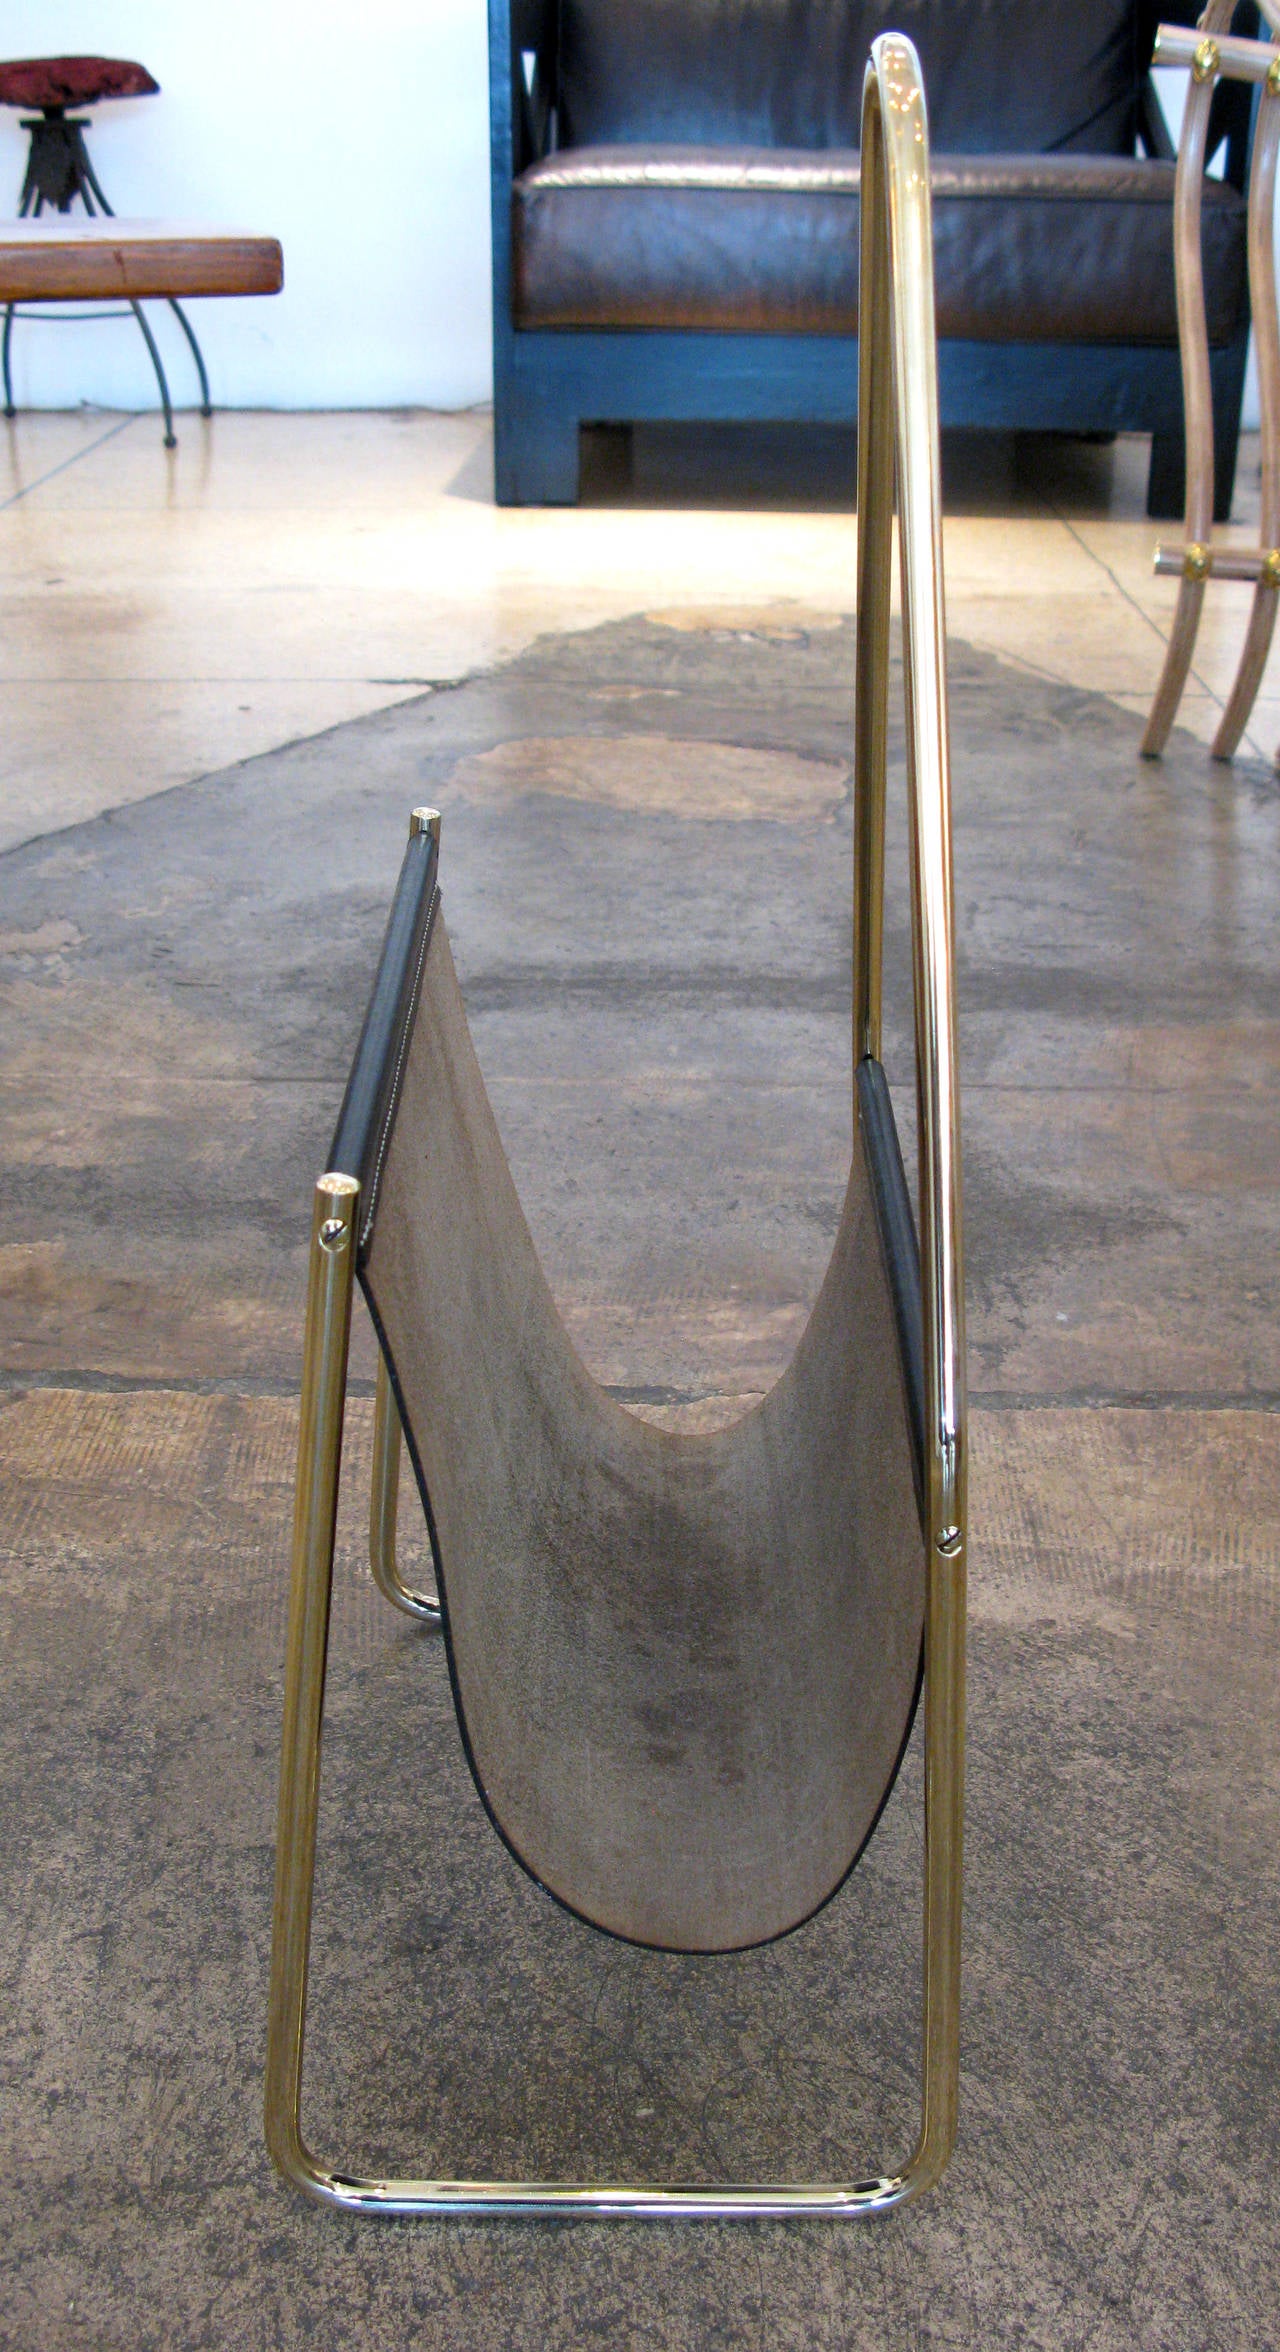 Brass and leather magazine rack by Carl Auböck. Produced in the 1950s in Vienna. Aged black leather and polished, hand-sculpted brass.

